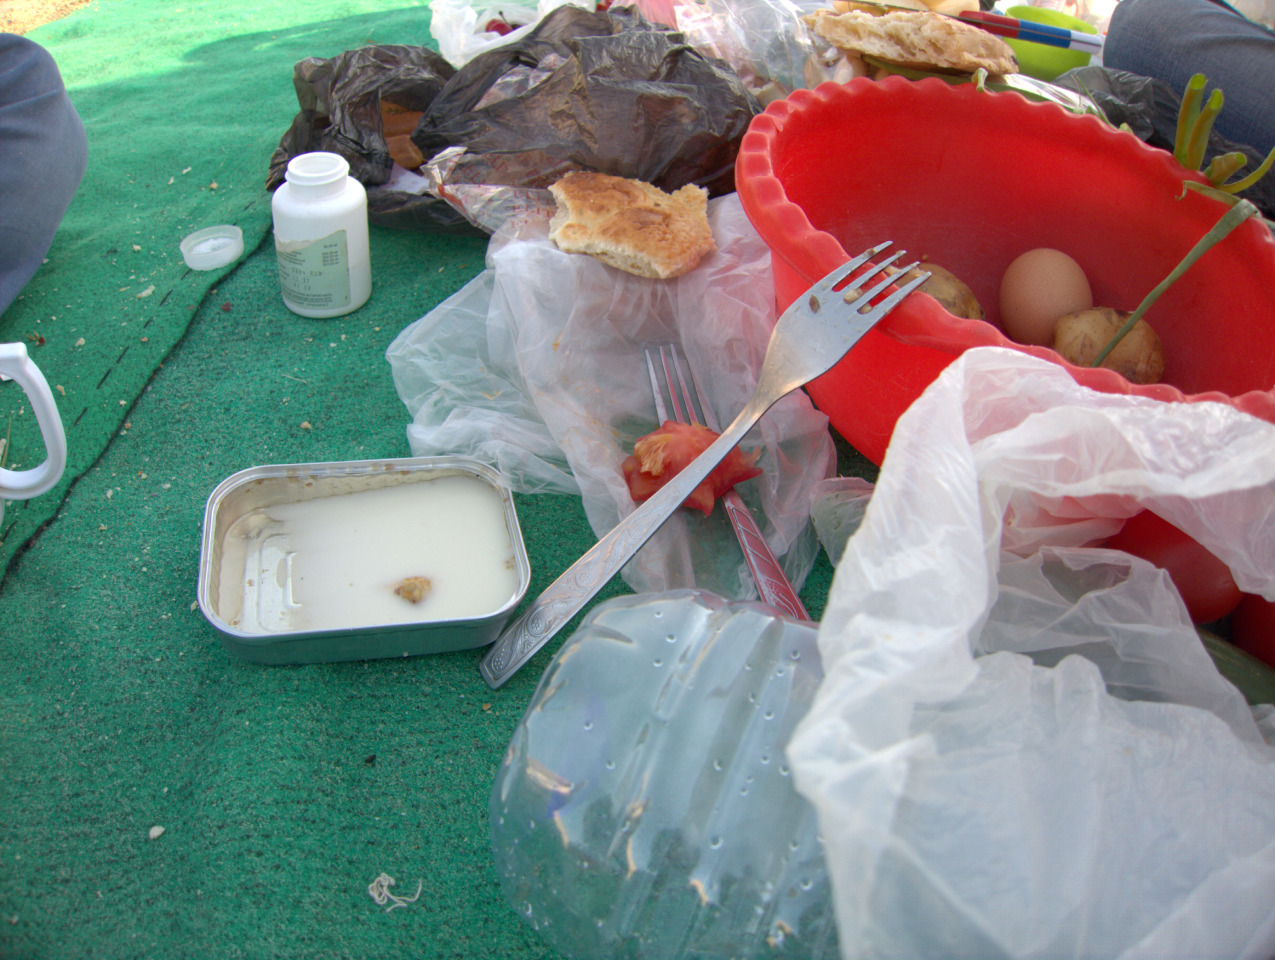 Milk inside of a sardine can sitting on a dirty green blanket. surrounded by garbage and a red bowl of food.